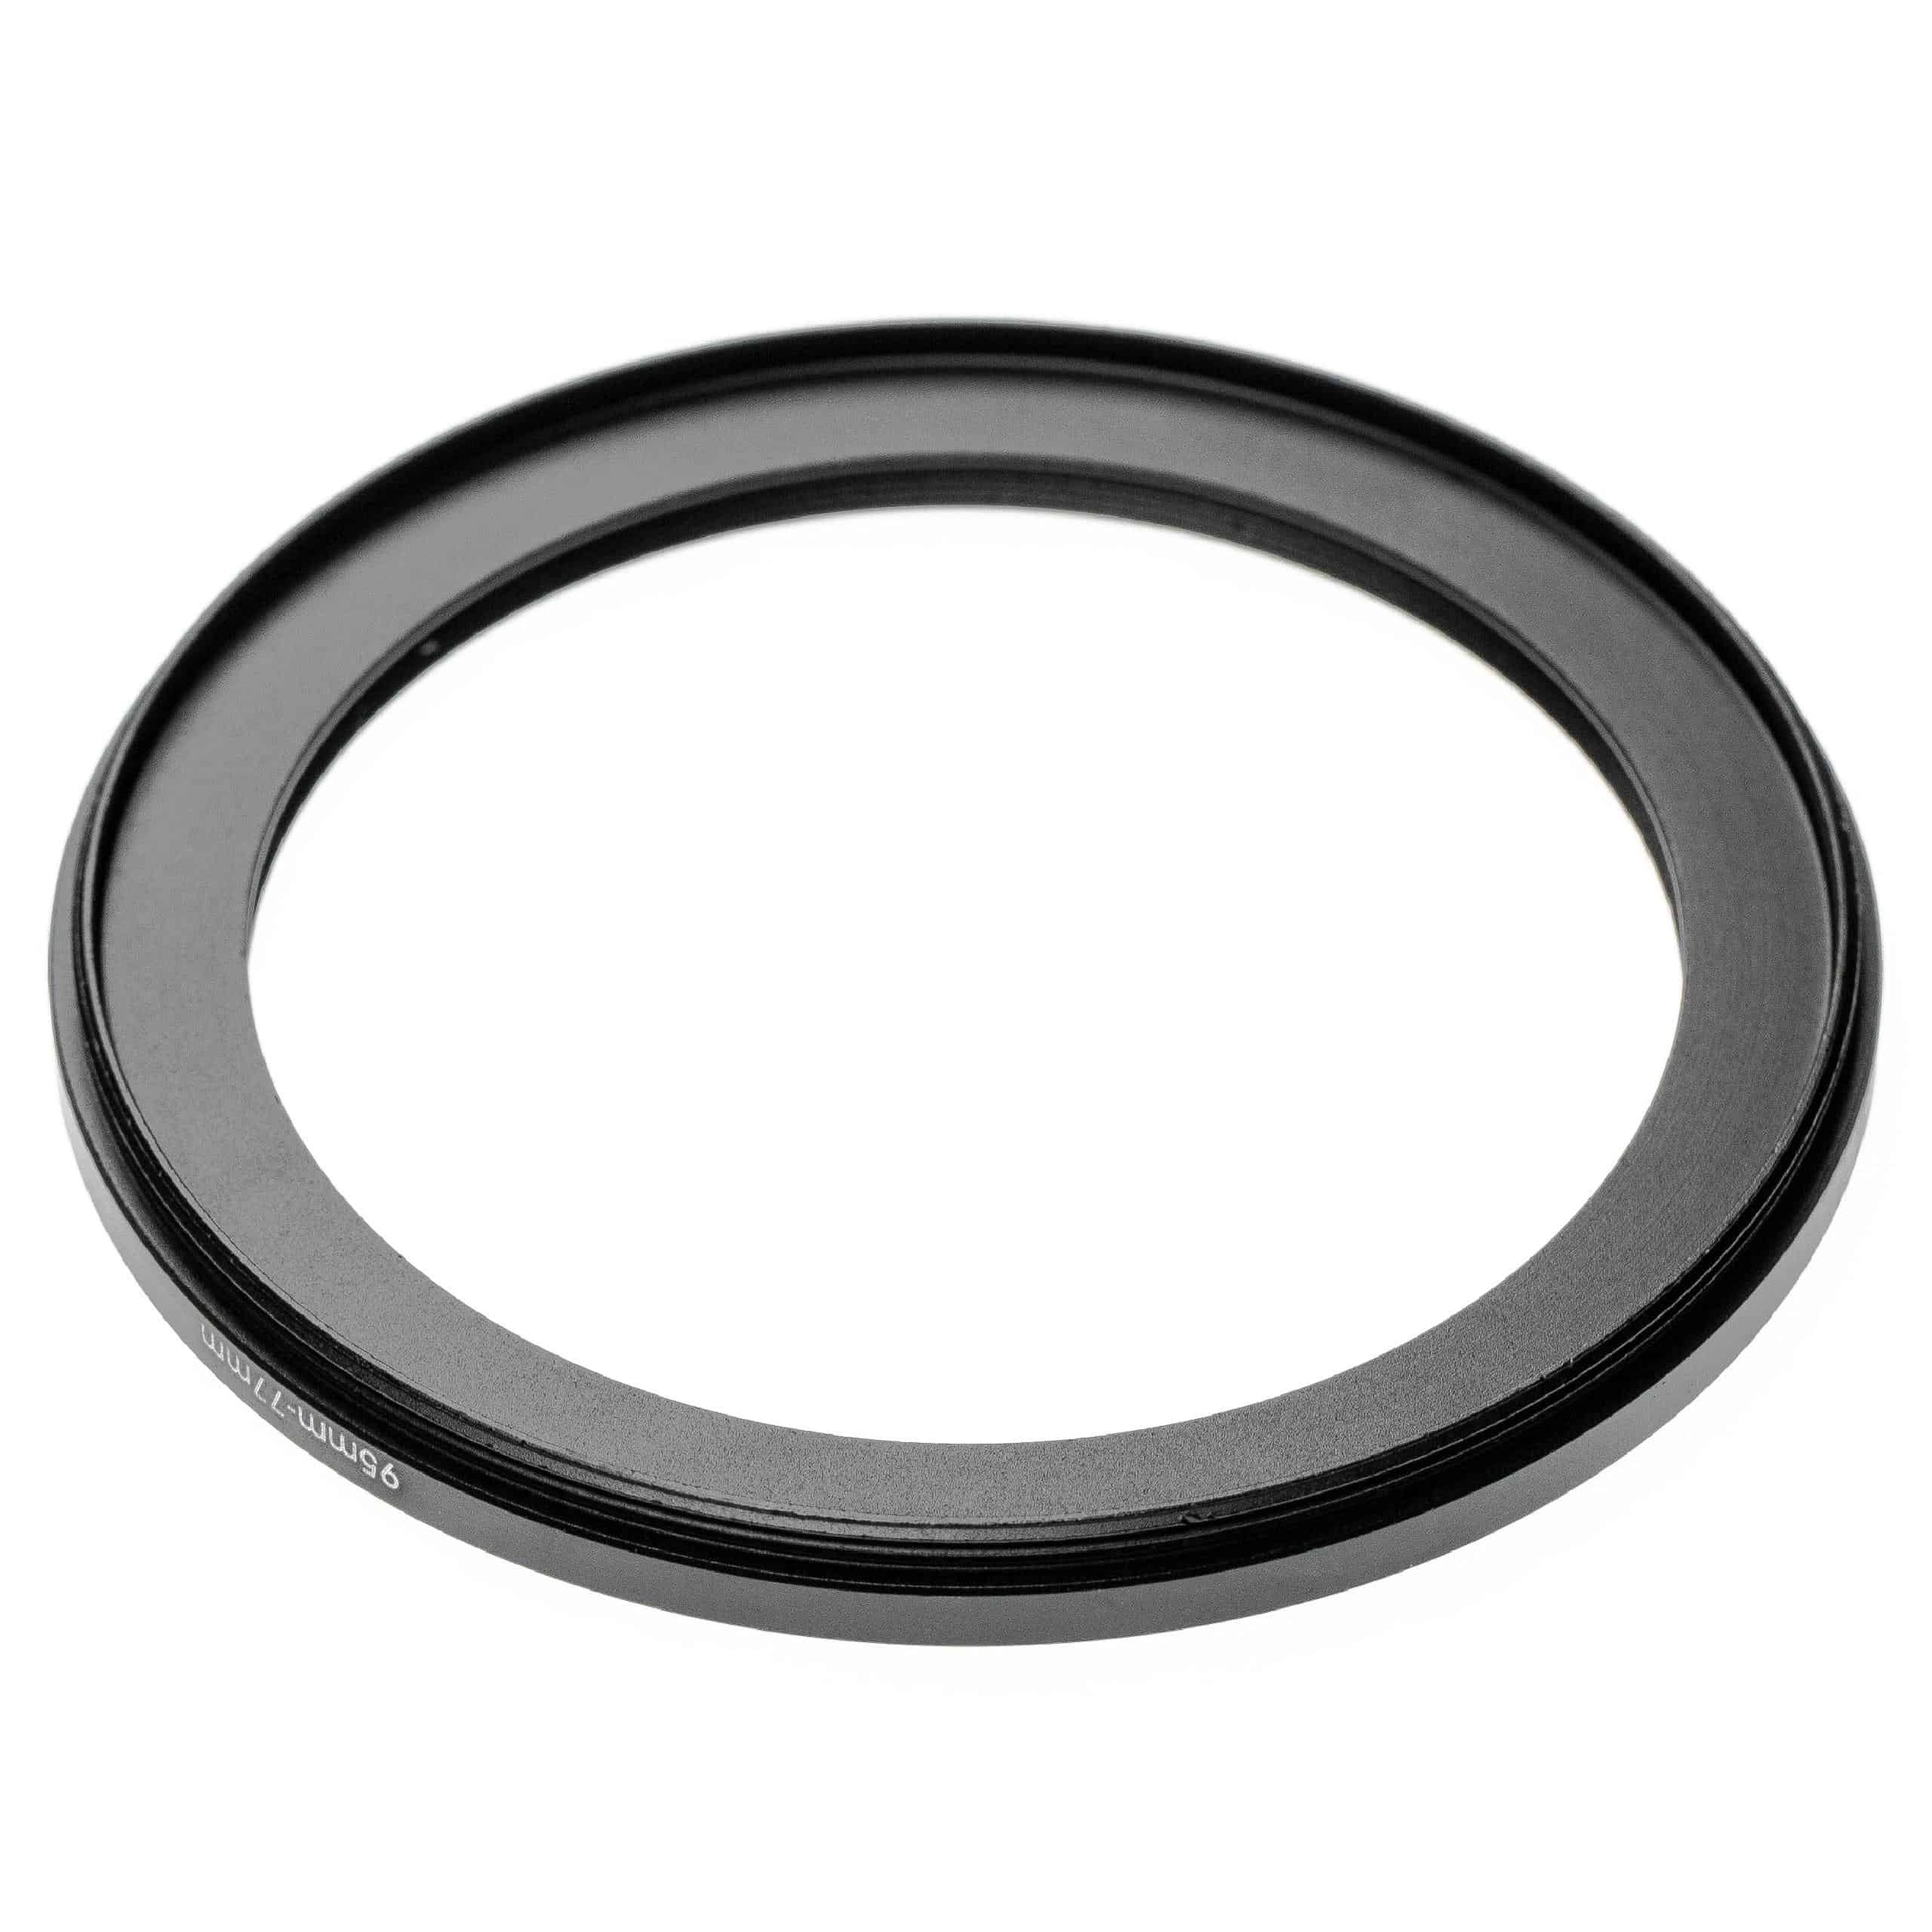 Step-Down Ring Adapter from 95 mm to 77 mm suitable for Camera Lens - Filter Adapter, Aluminium (Anodised)